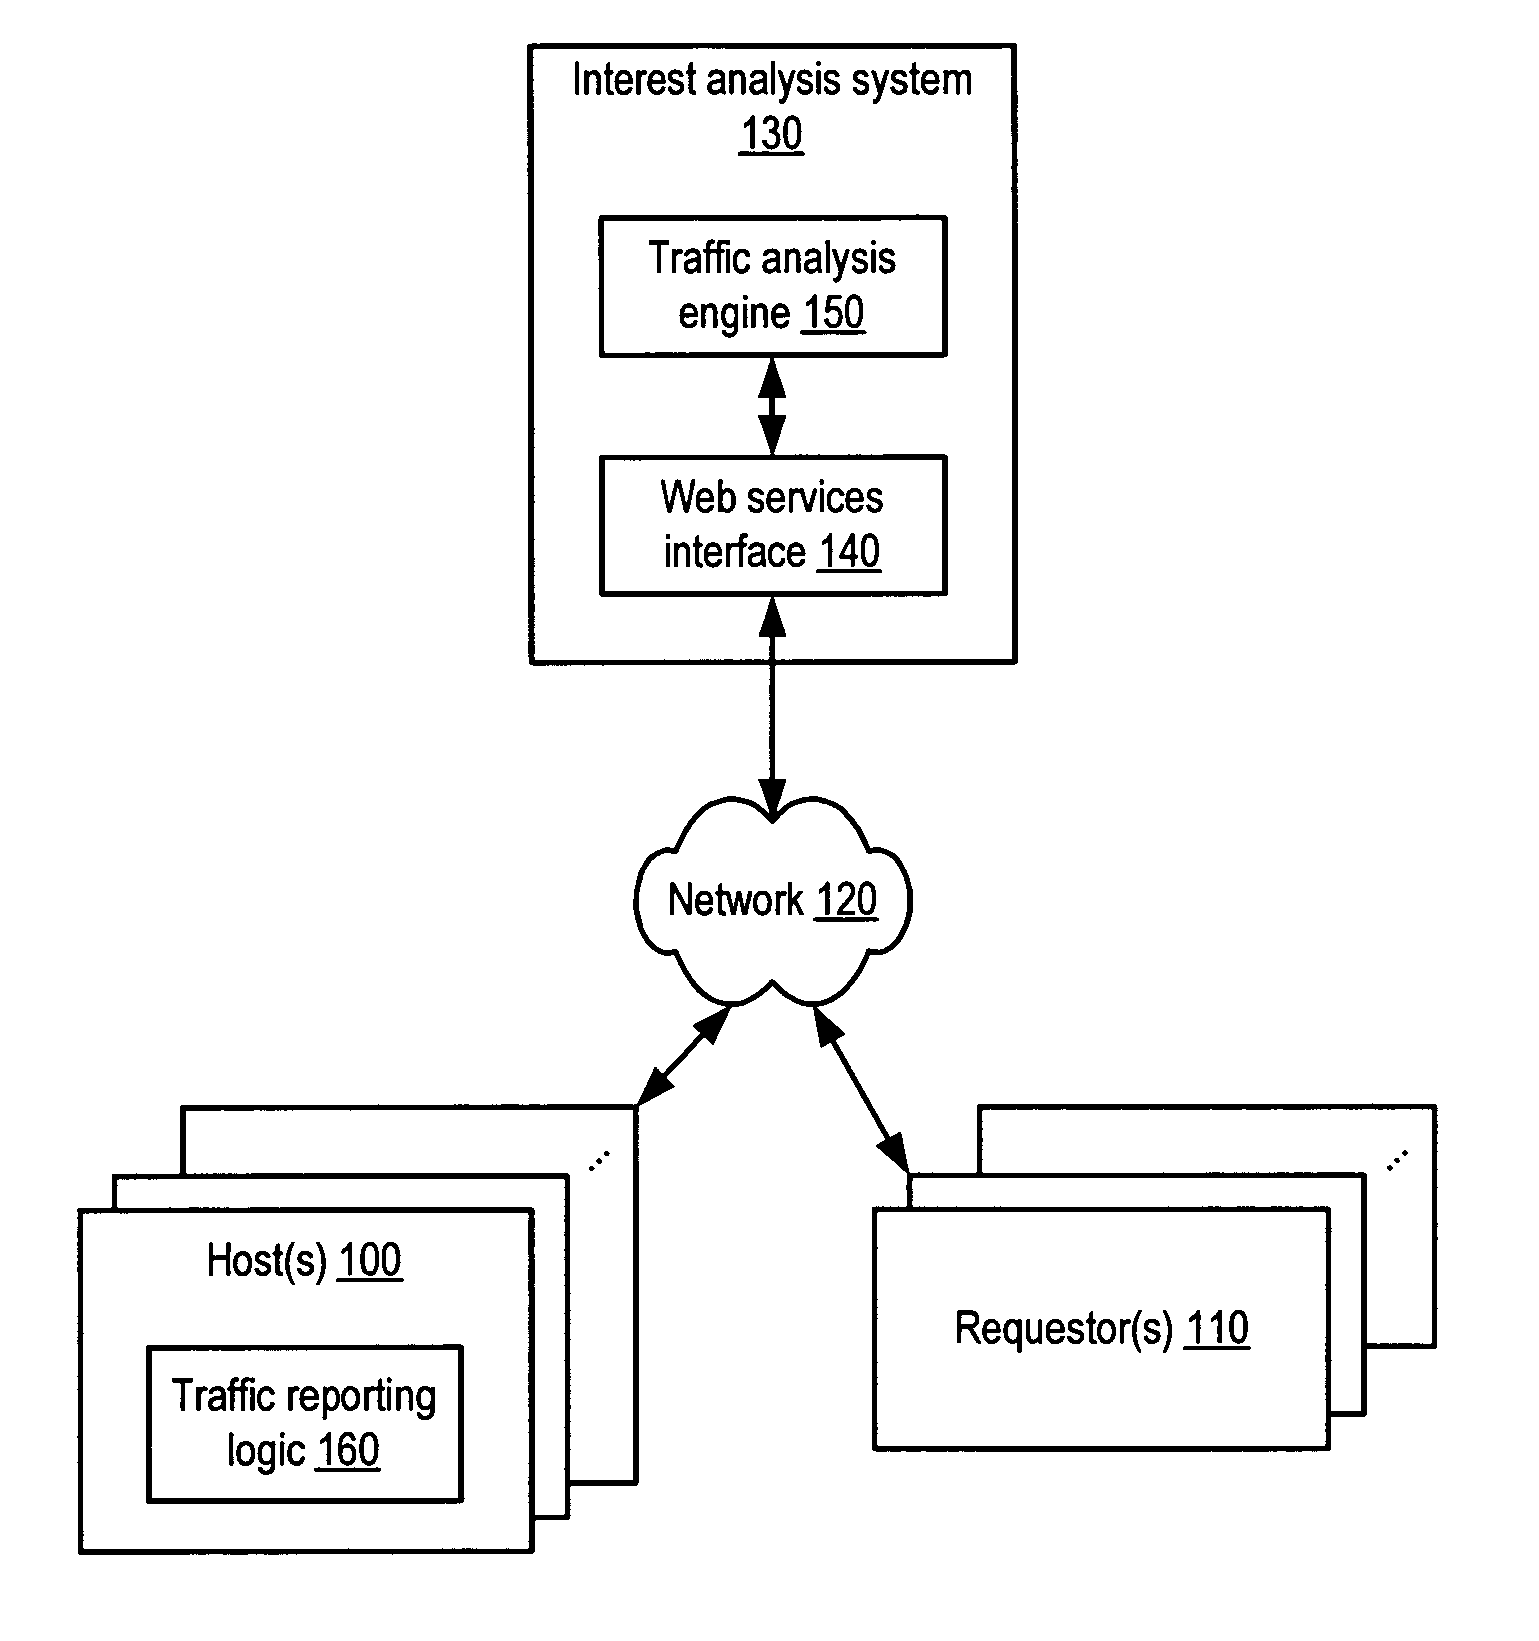 System and method for indicating interest of online content